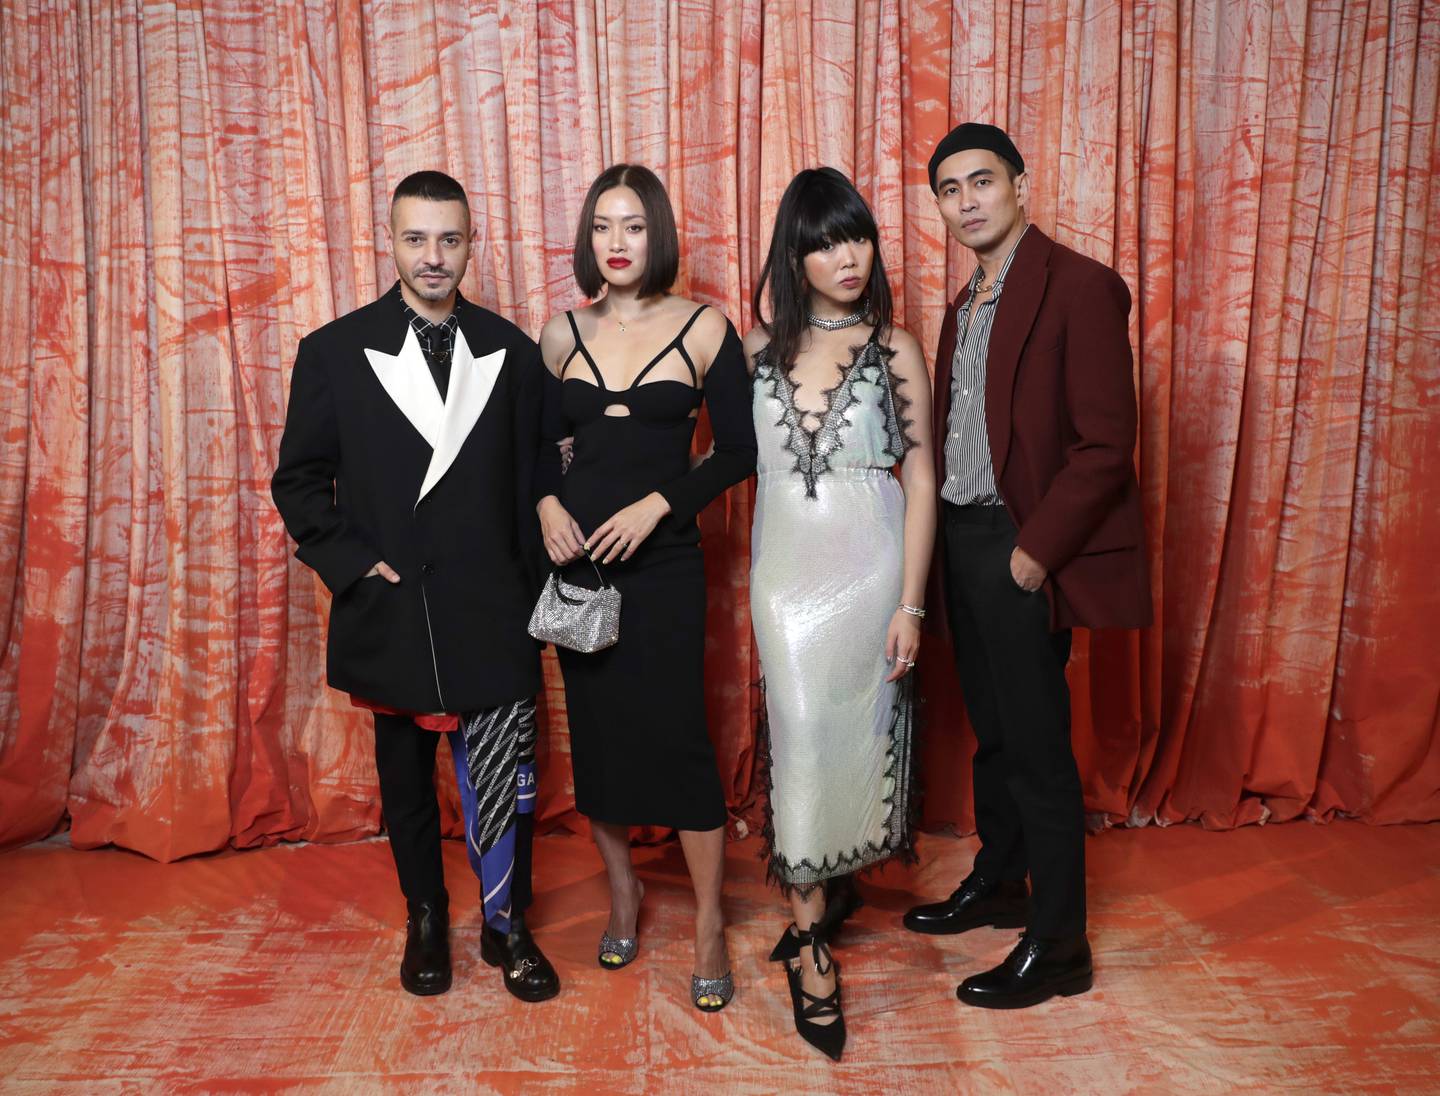 OXFORDSHIRE, ENGLAND - DECEMBER 03:  (L-R) Stavros Karelis, Tiffany Hsu, Susanna Lau and Han Chong attend the BoF VOICES 2021 Gala Dinner at Soho Farmhouse on December 03, 2021 in Oxfordshire, England. (Photo by John Phillips/Getty Images for BoF VOICES)